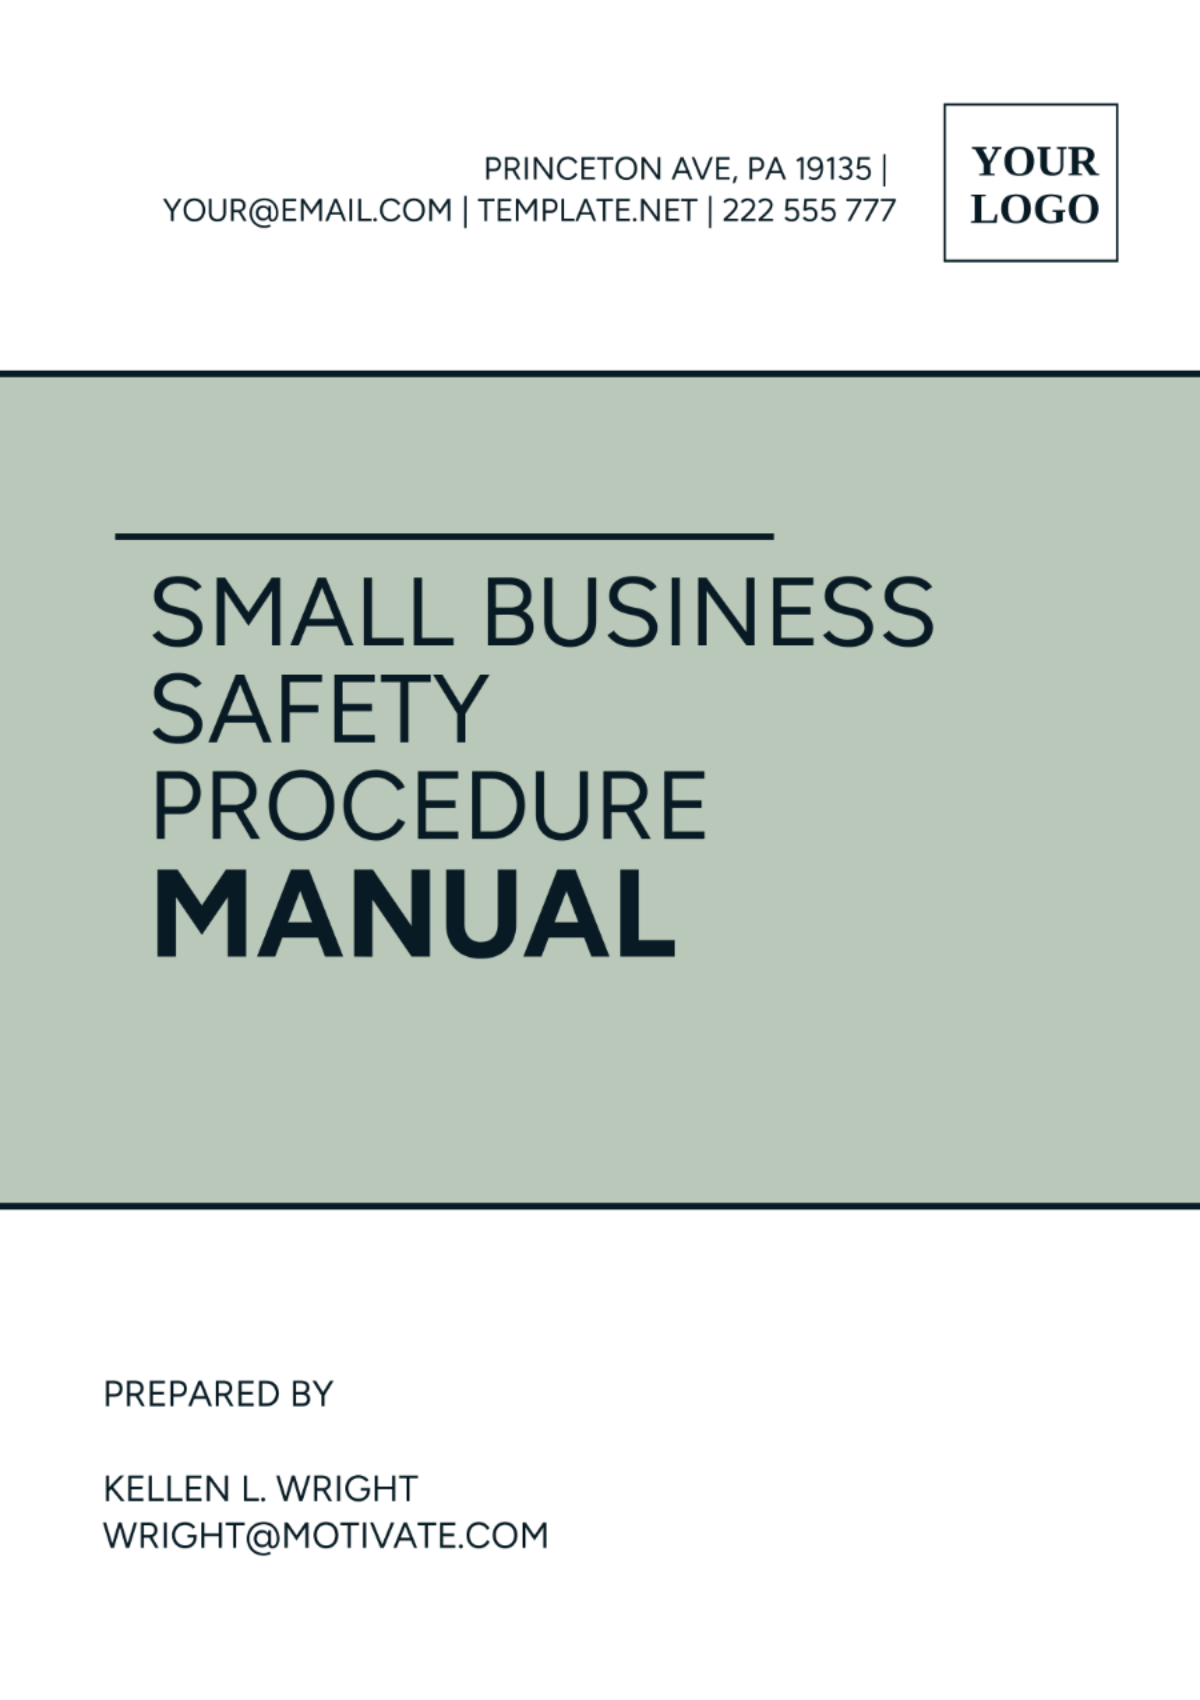 Small Business Safety Procedure Manual Template